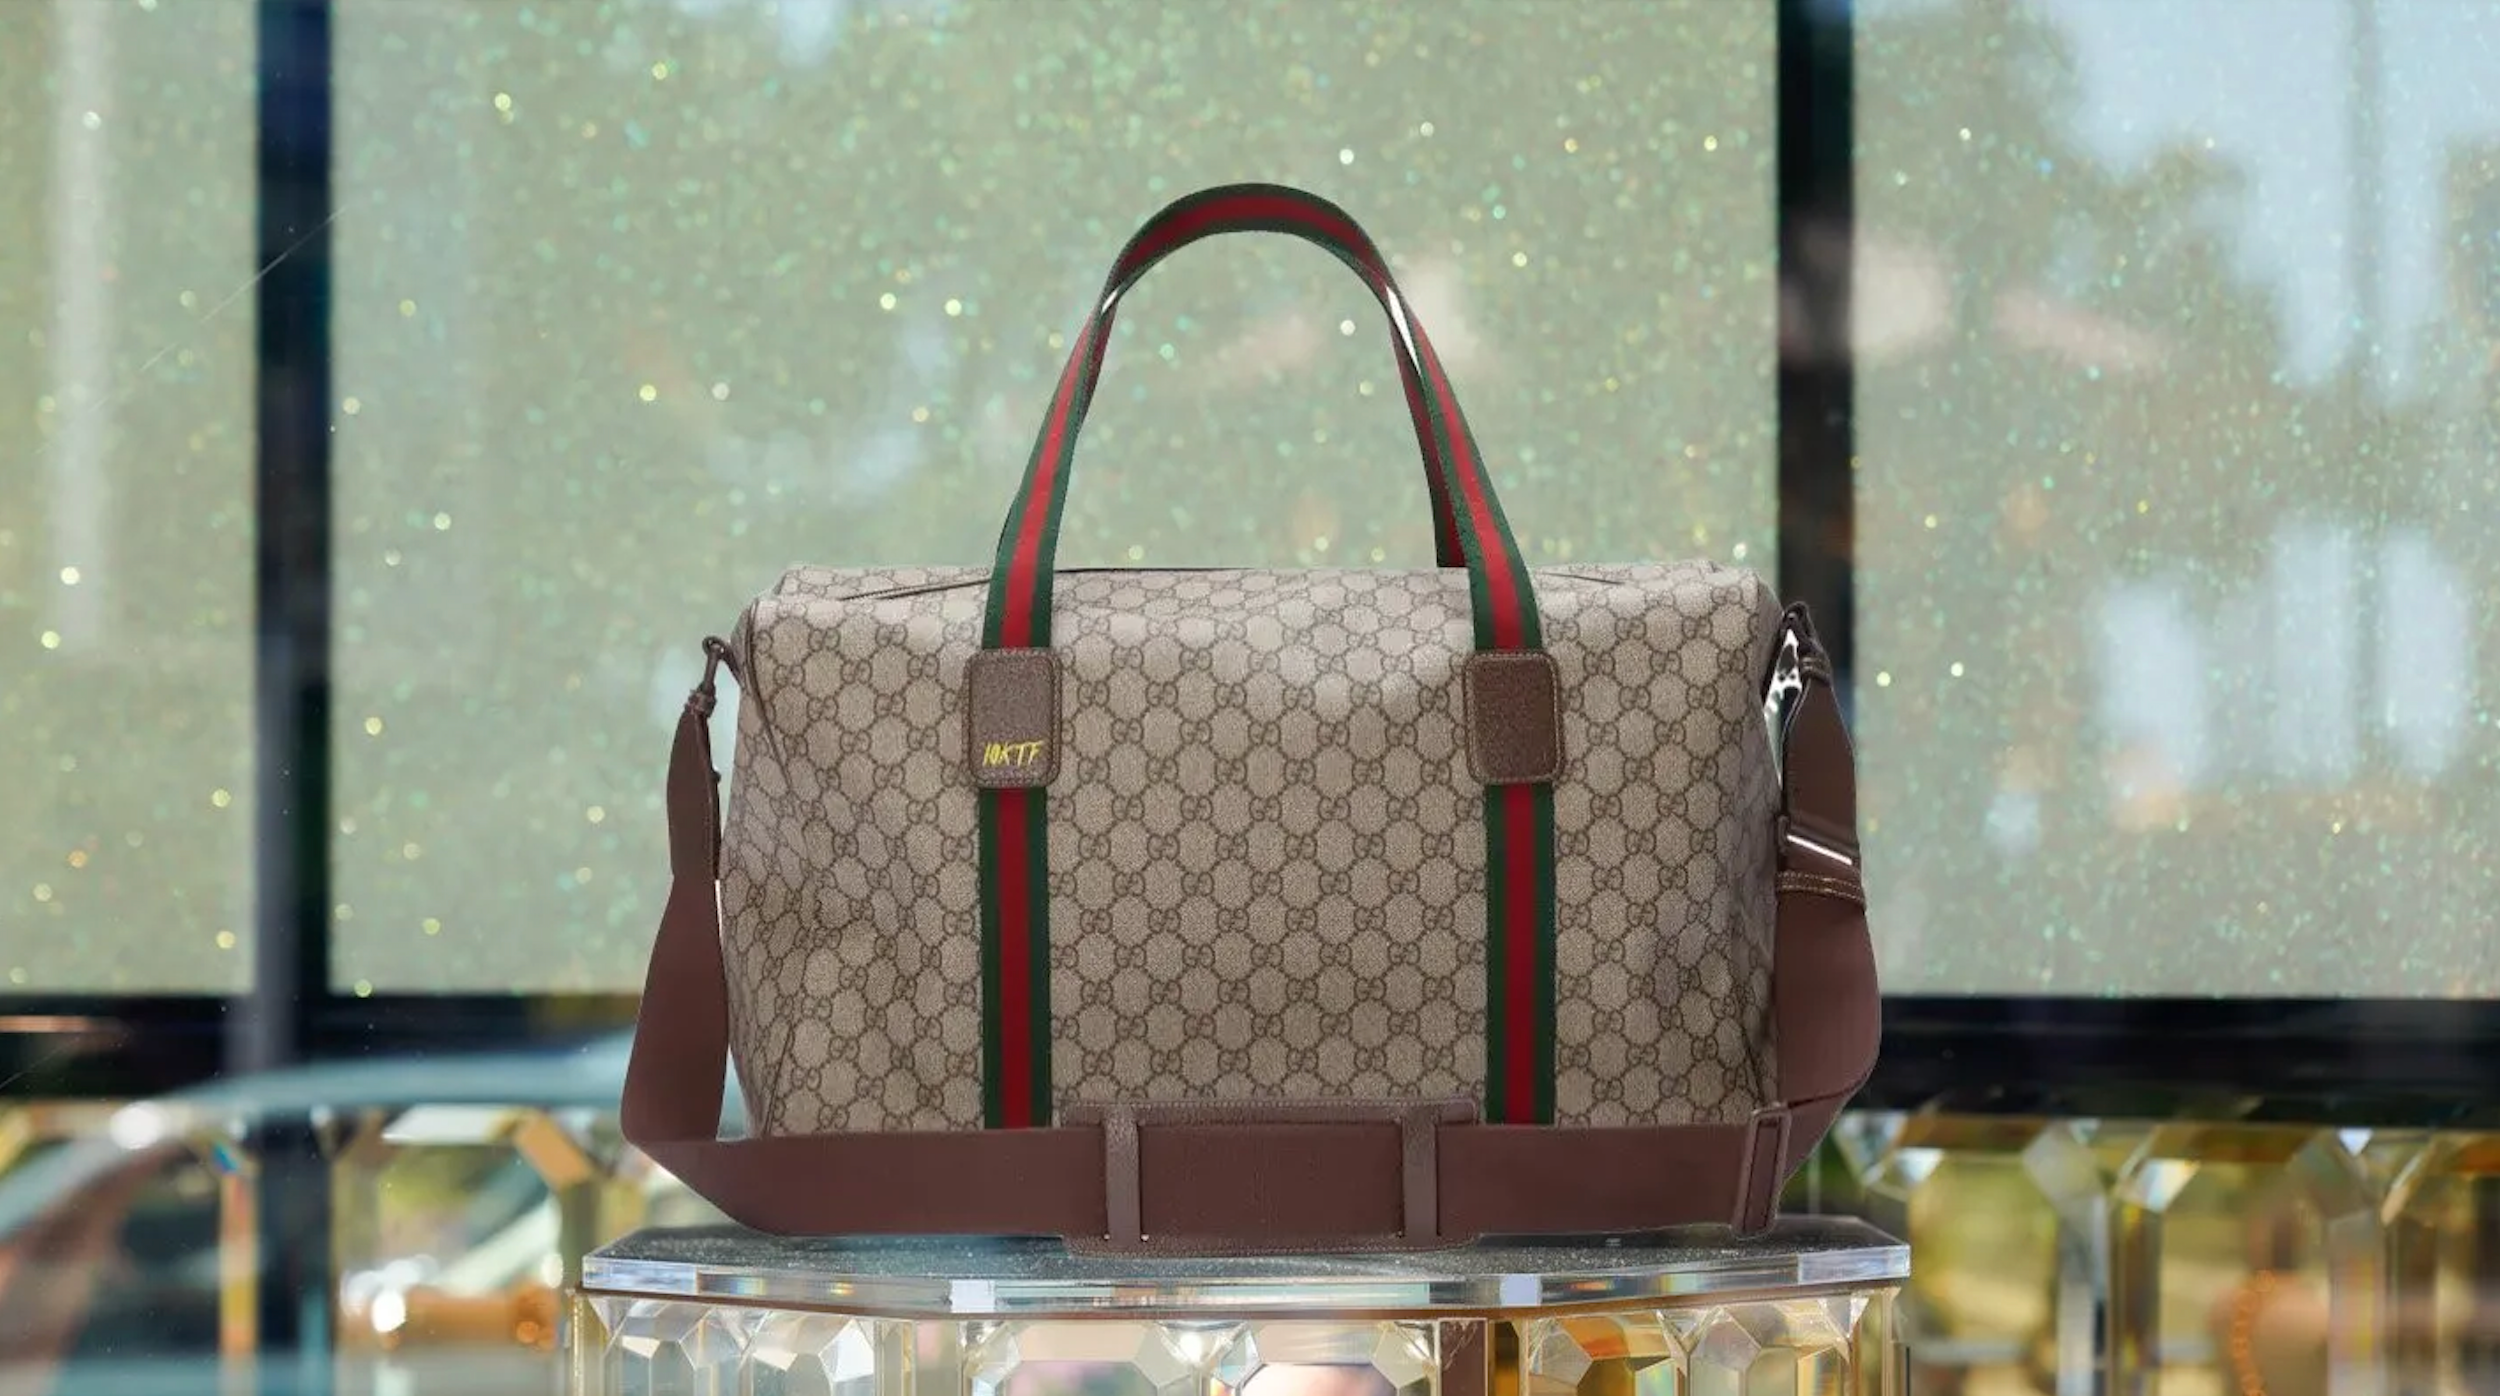 Luxury consumers are constantly seeking the next big thing, and brands are banking on it being “phygital.” But where does a mixed-reality product fit in today’s market? Photo: Gucci